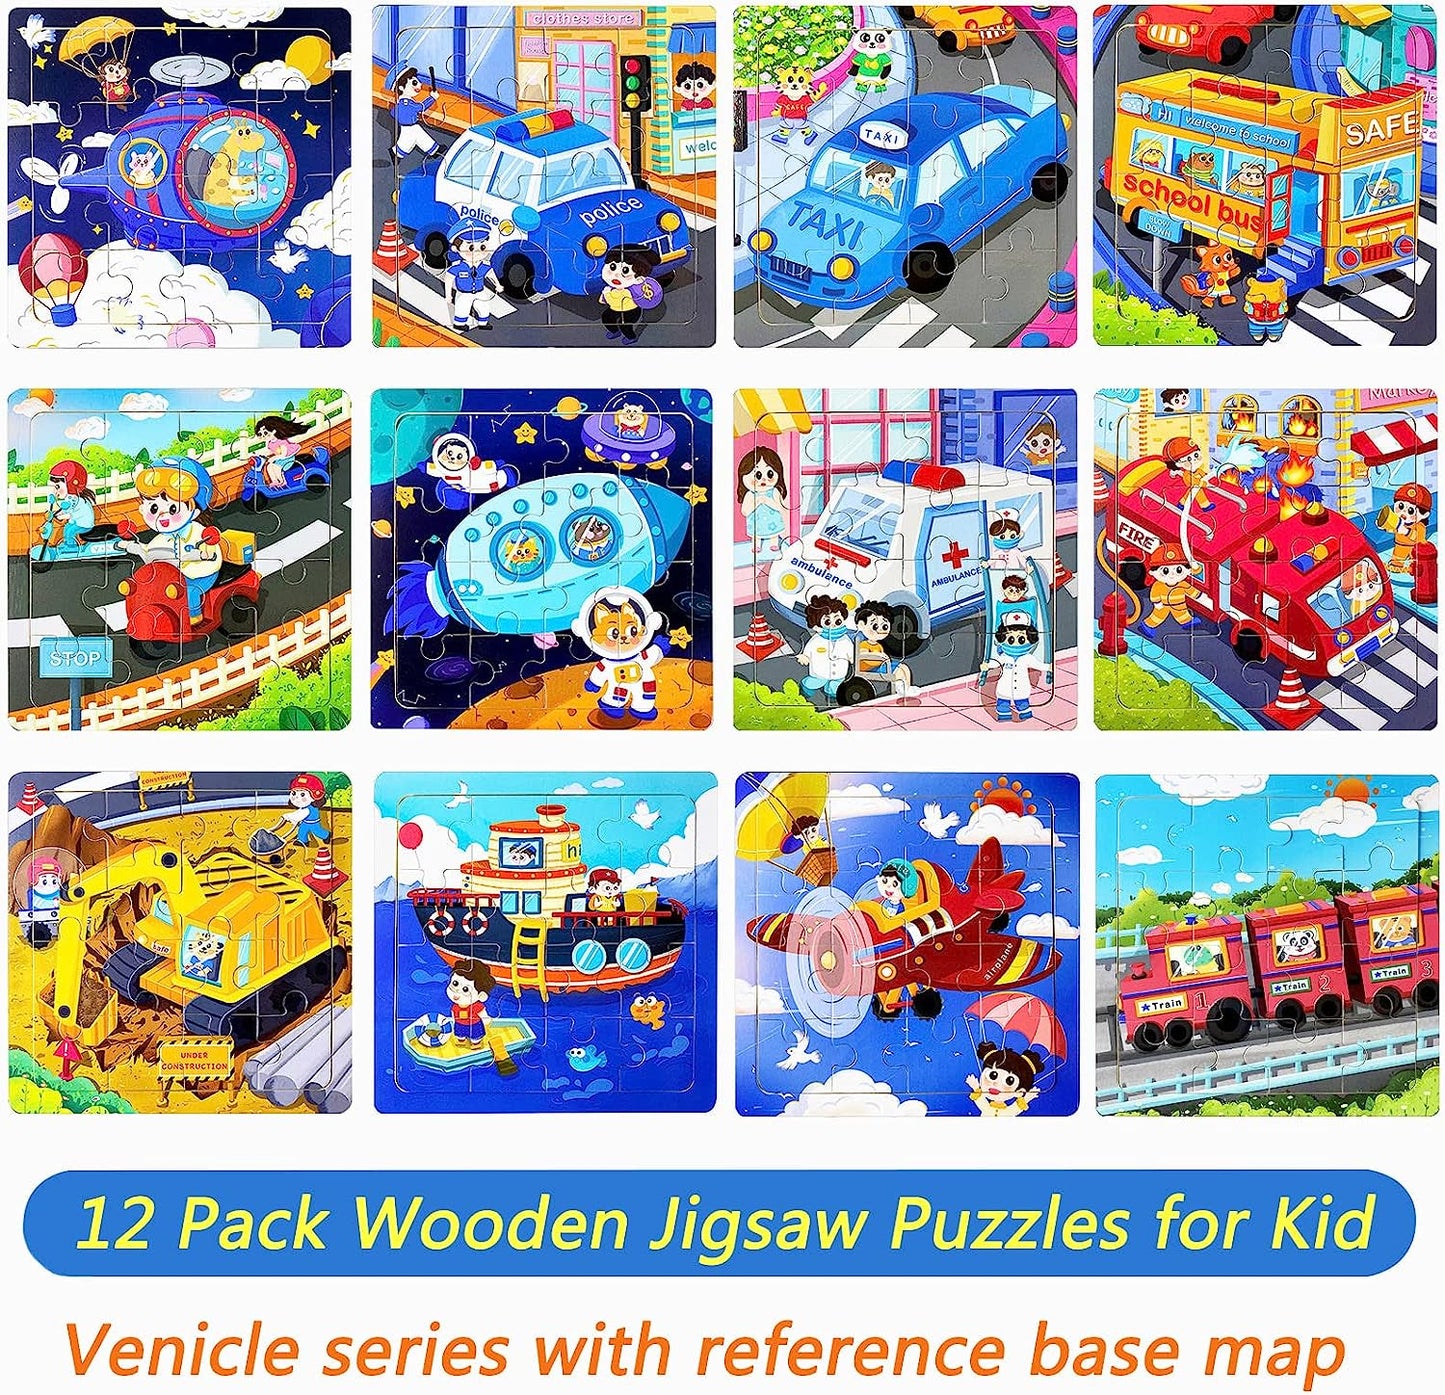 Wooden Jigsaw Puzzles for Kids Ages 3-5 Toddler Puzzles 16 Pieces Wooden Puzzles Preschool Educational Learning Toys Set Vehicle Puzzles for 3 4 5 6 Years Old Boys and Girls Gift (12 Pack Puzzles)